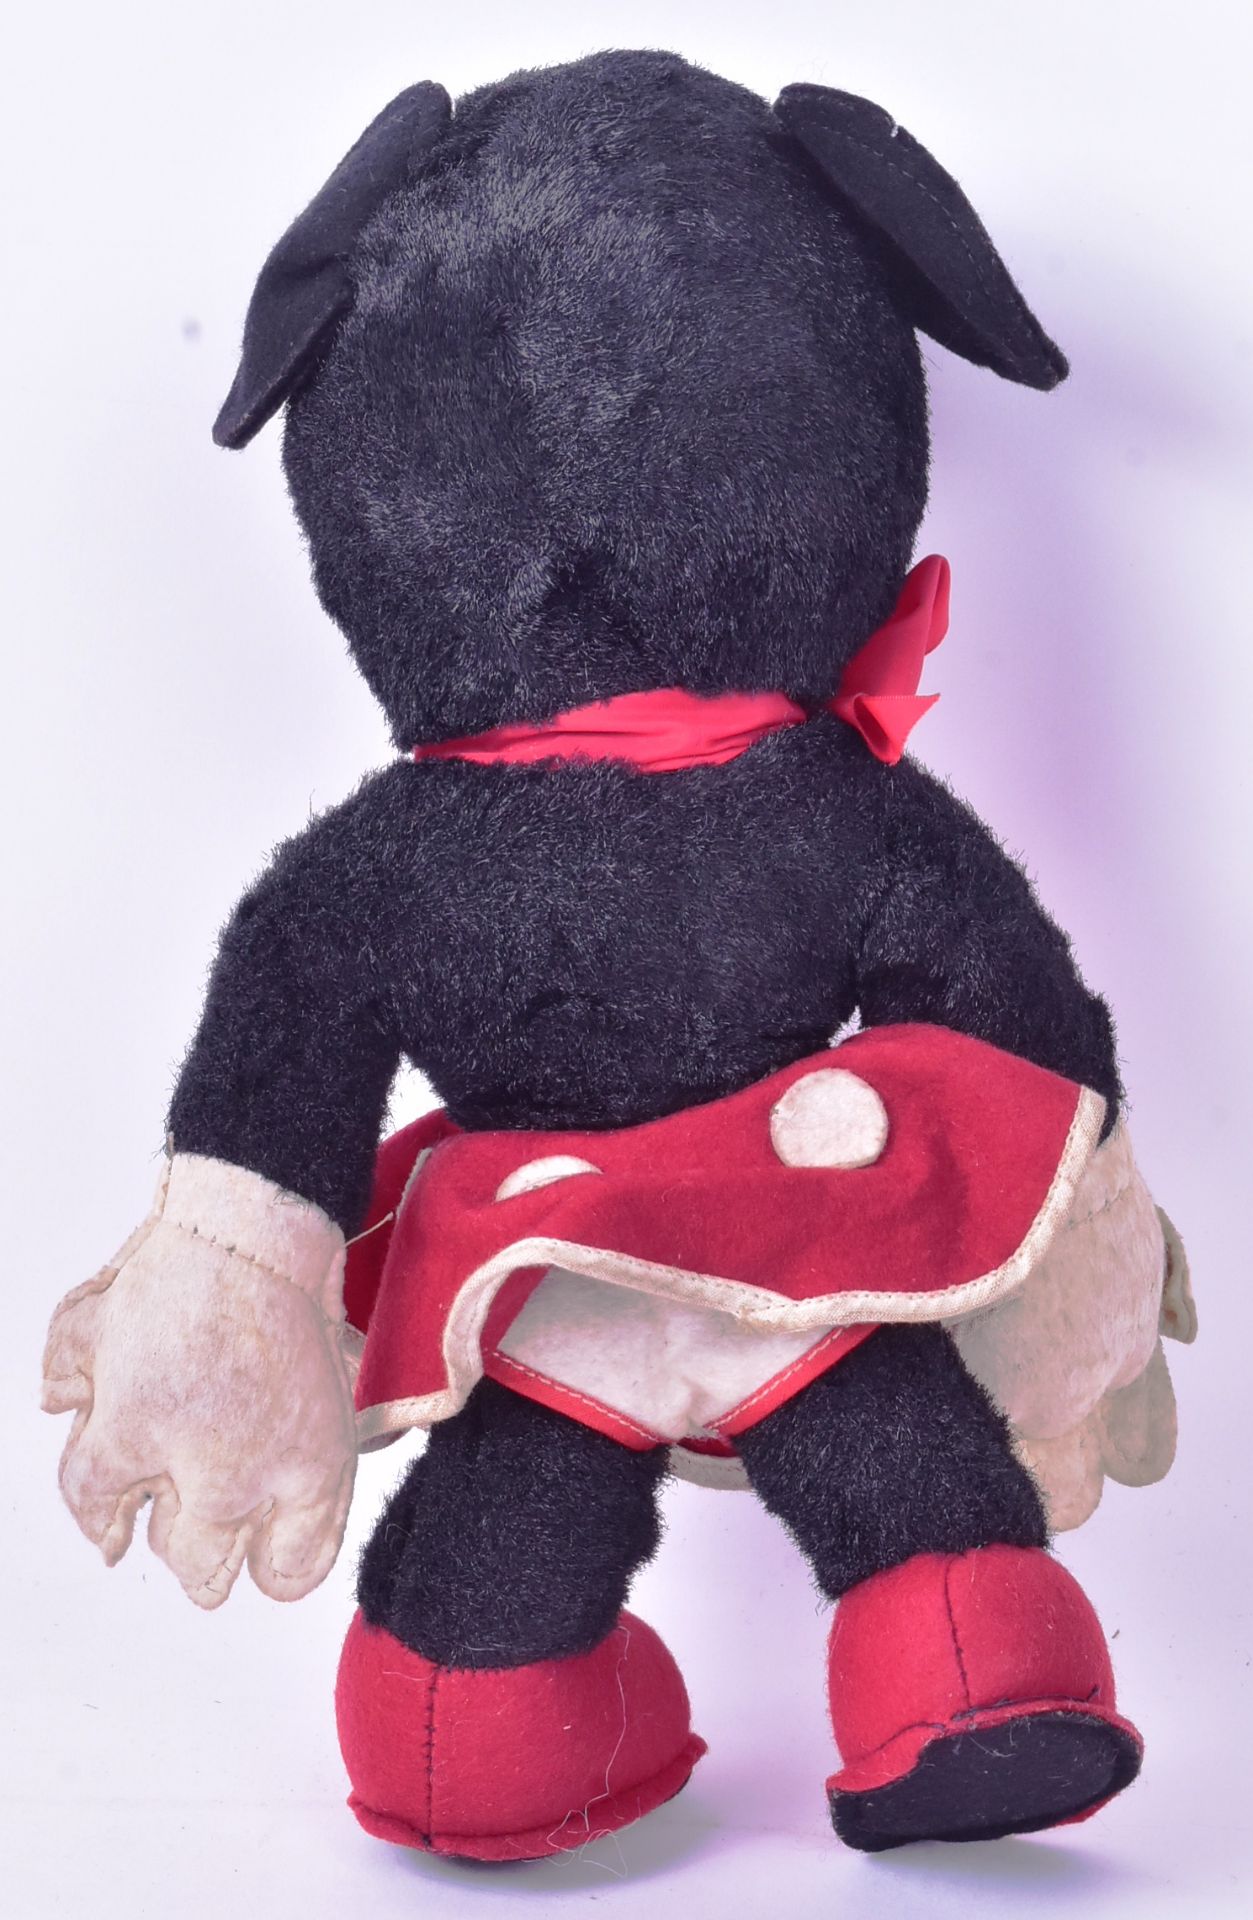 TEDDY BEARS - VINTAGE MERRYTHOUGHT MINNIE MOUSE - Image 4 of 5